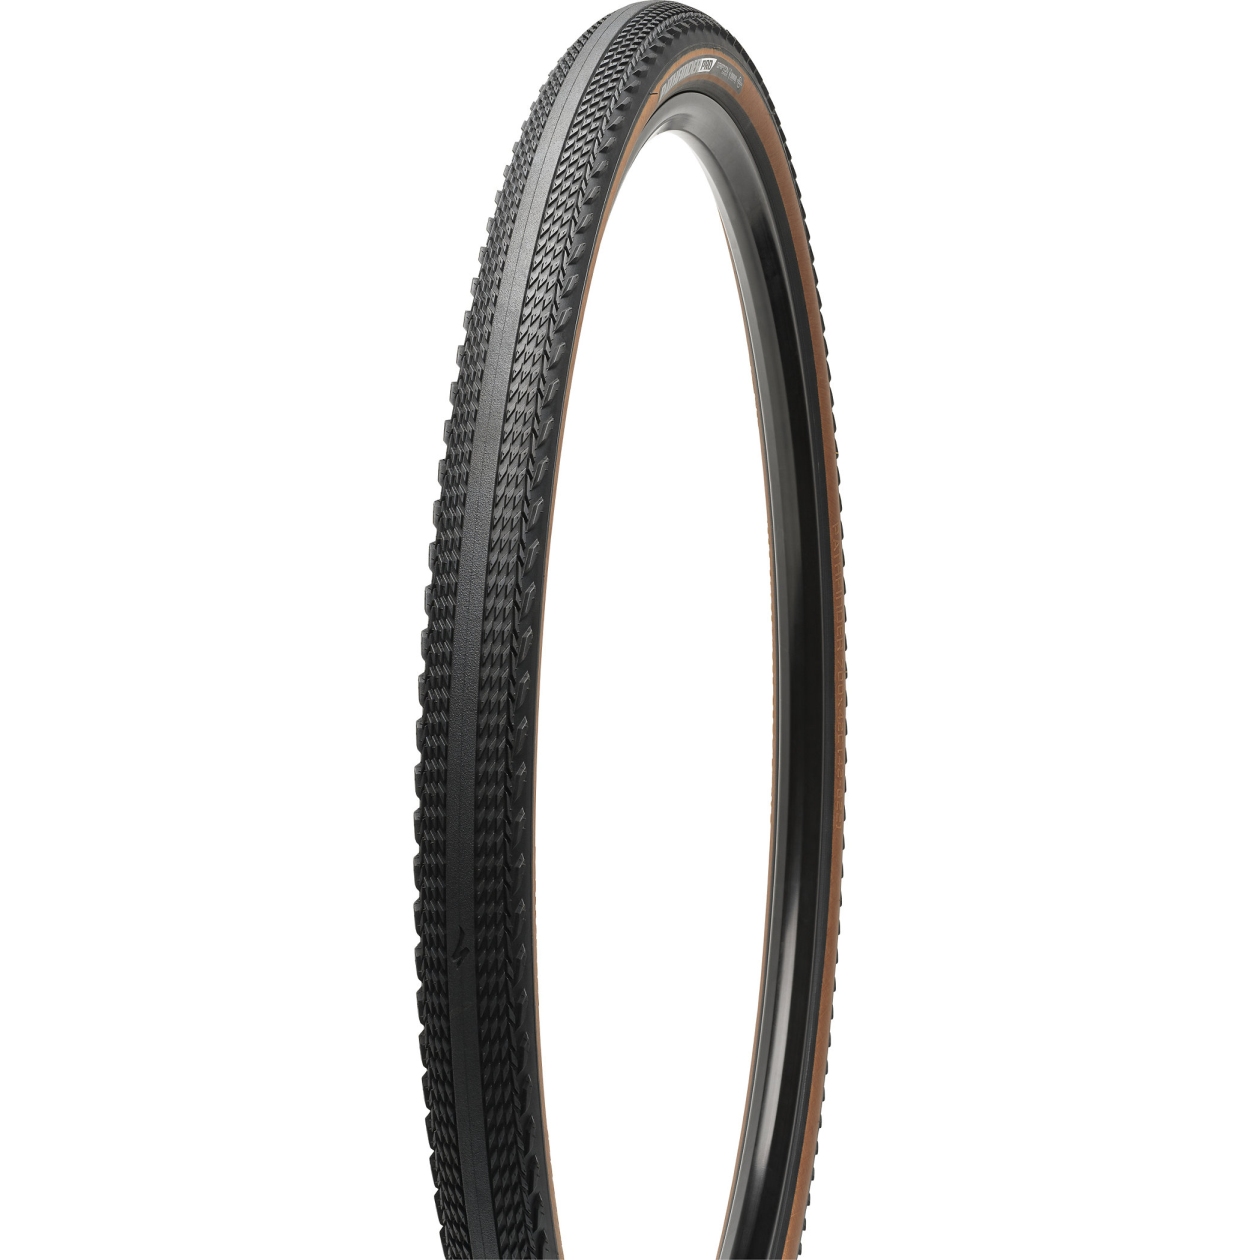 Image of Specialized Pathfinder Pro 2Bliss Ready Gravel Folding Tire 42-622 - Tan Sidewalls